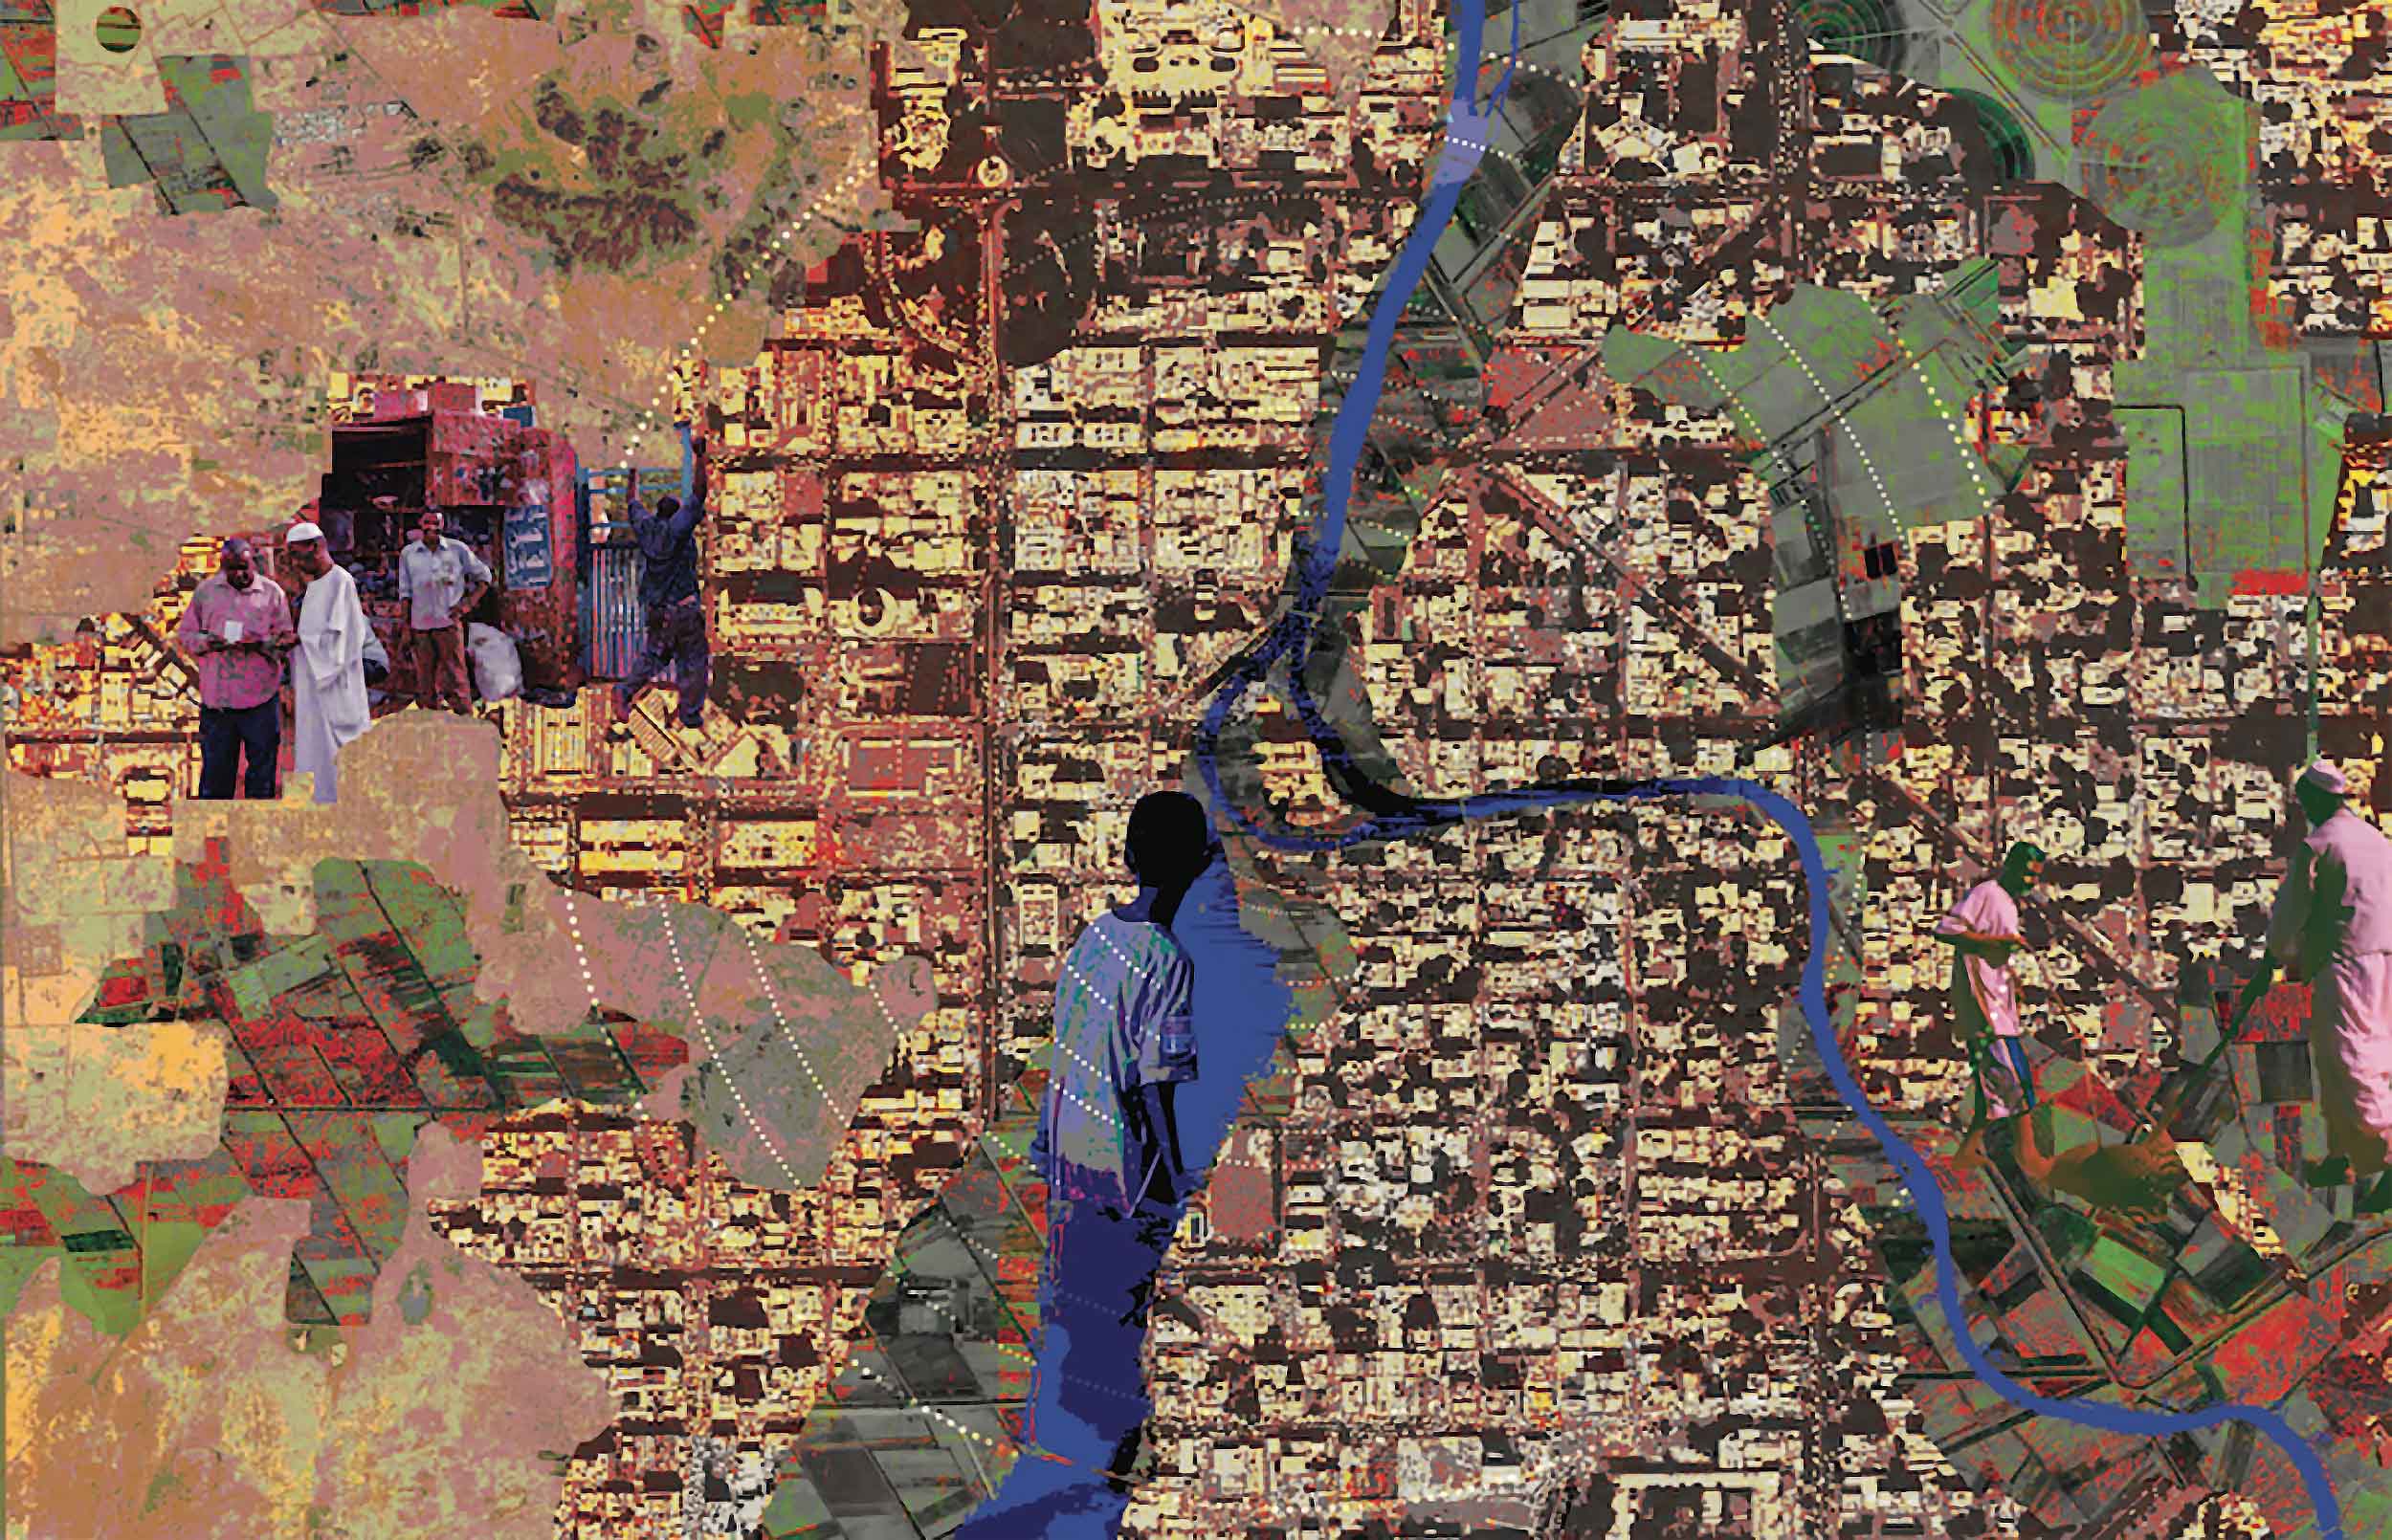 Collage of an arial view of a city with glimpses of people working